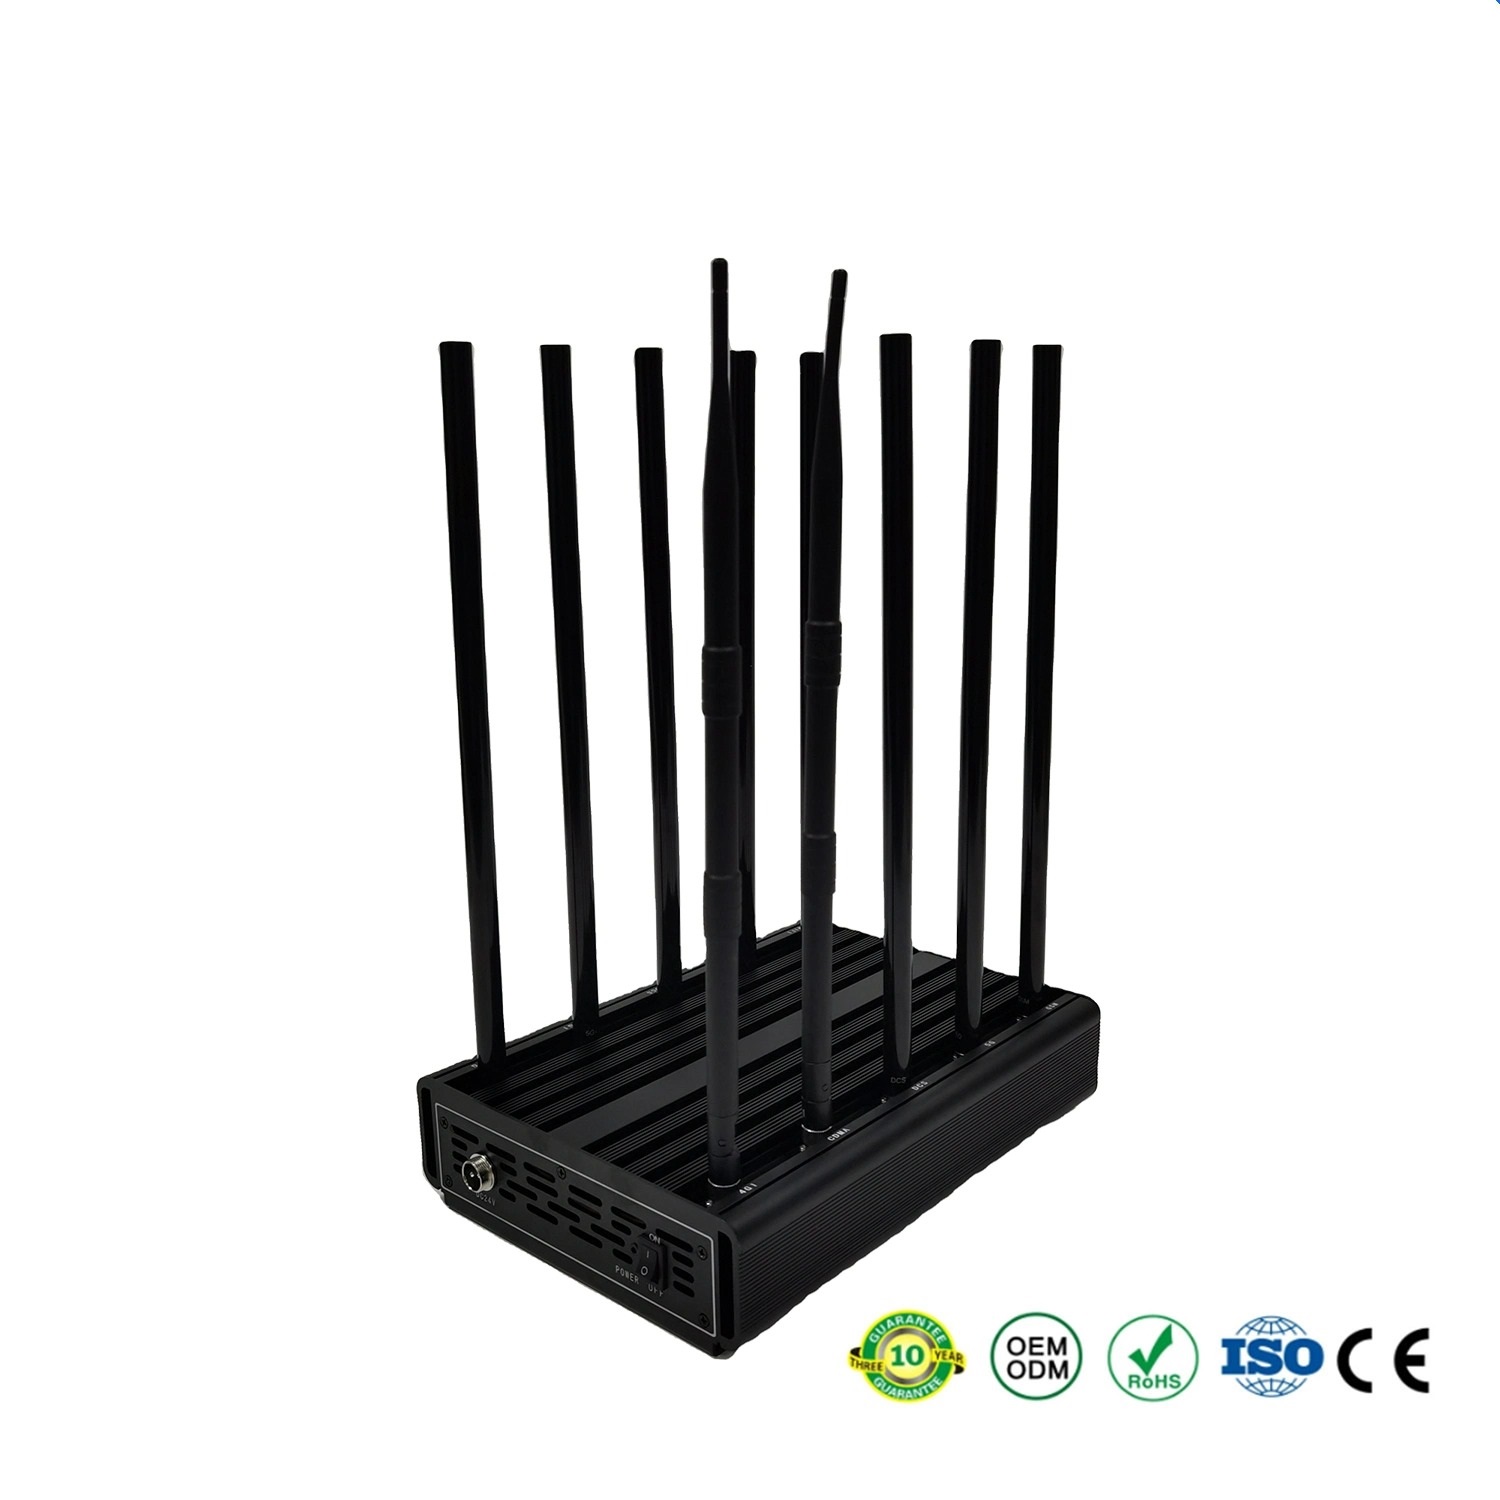 High power cell phone jammer